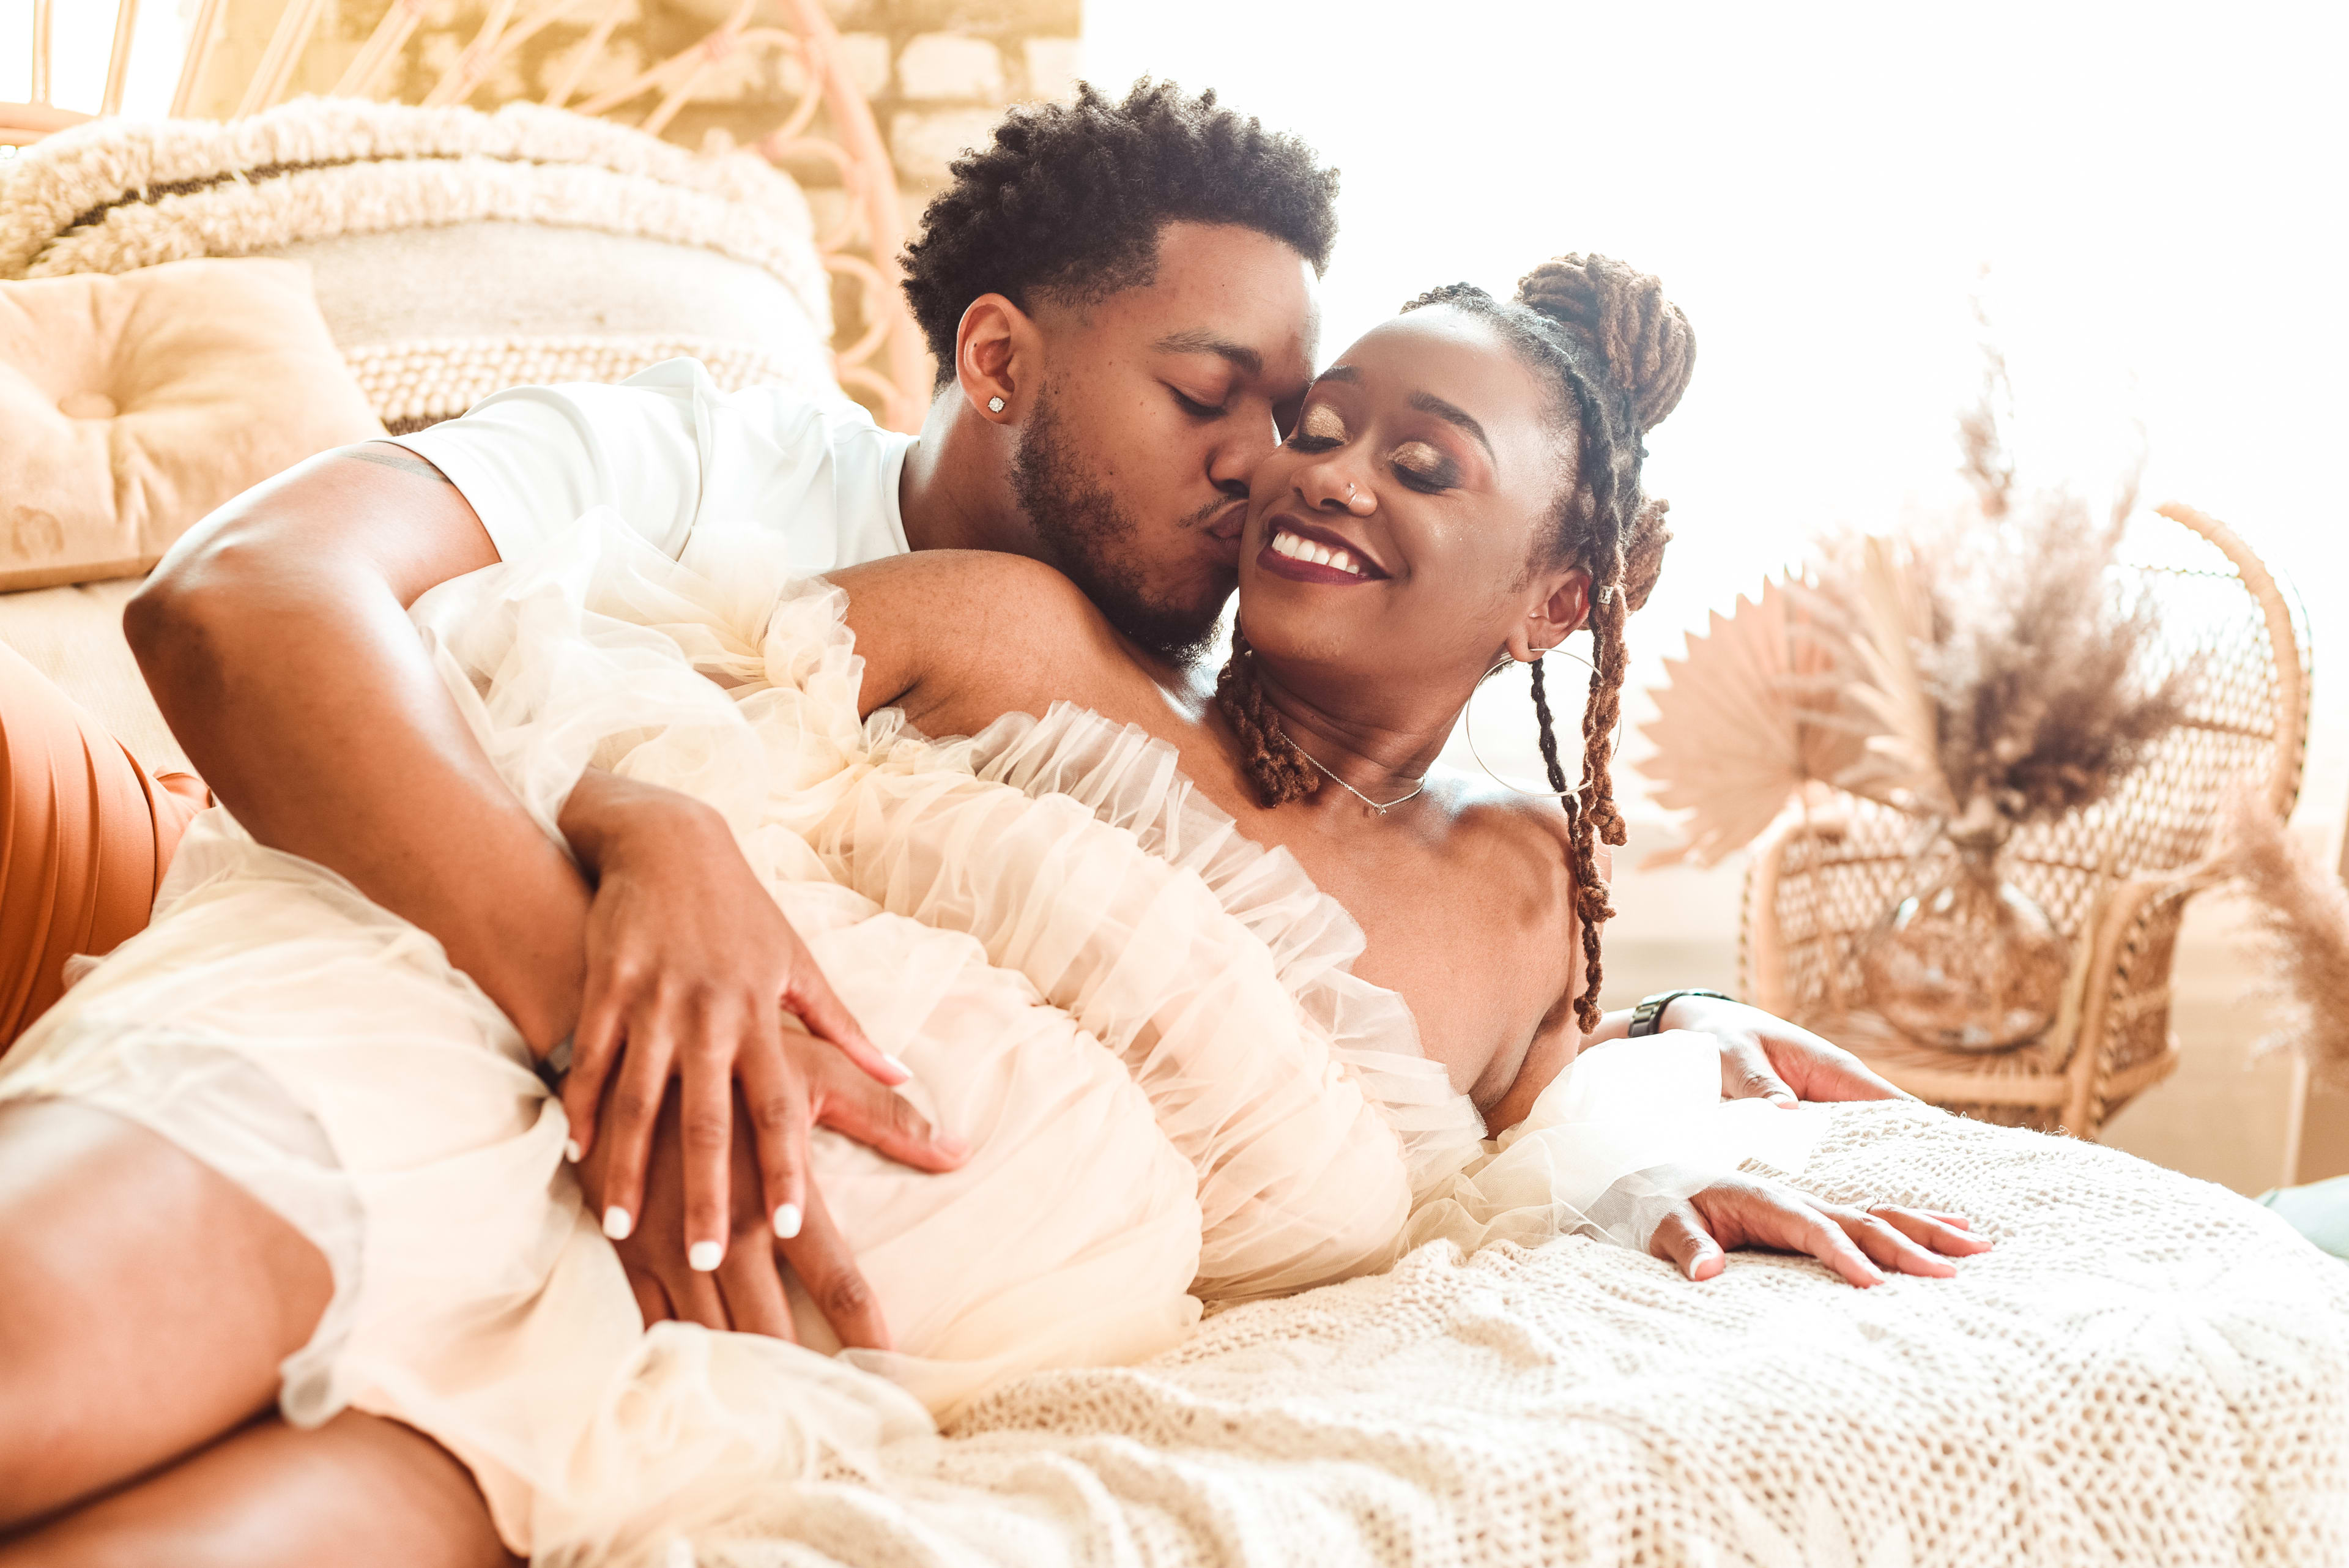 A white maternity photo shoot of a man and woman lying on a boho-style bed in beige bedding.